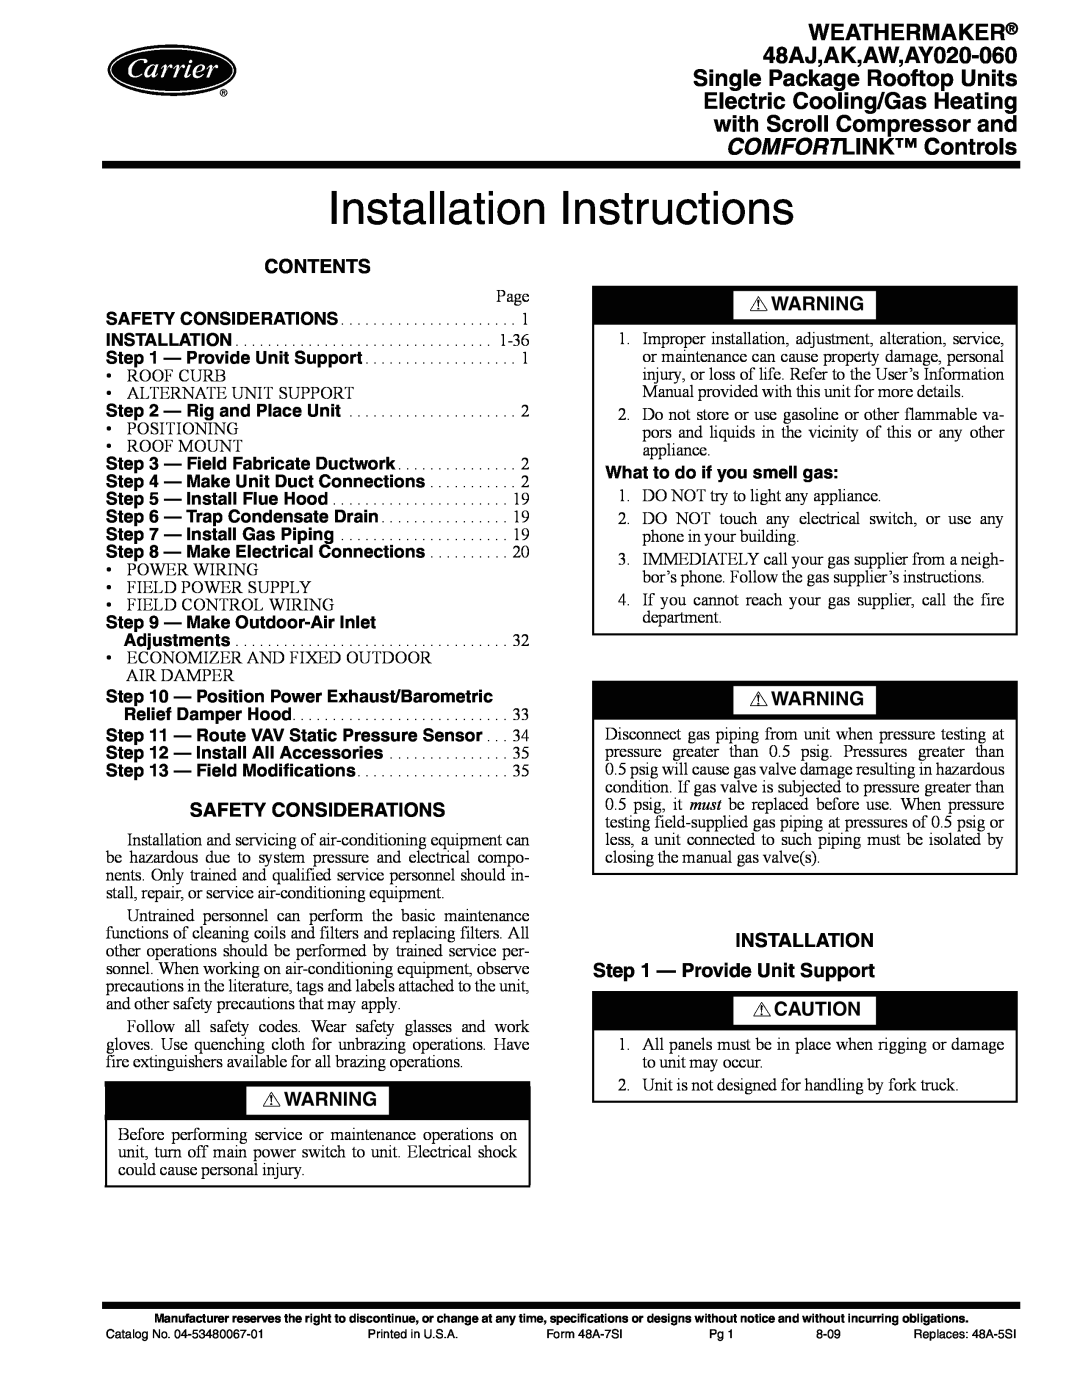 Carrier 48AJ installation instructions Installation Instructions, Contents, Safety Considerations, Make Outdoor-AirInlet 